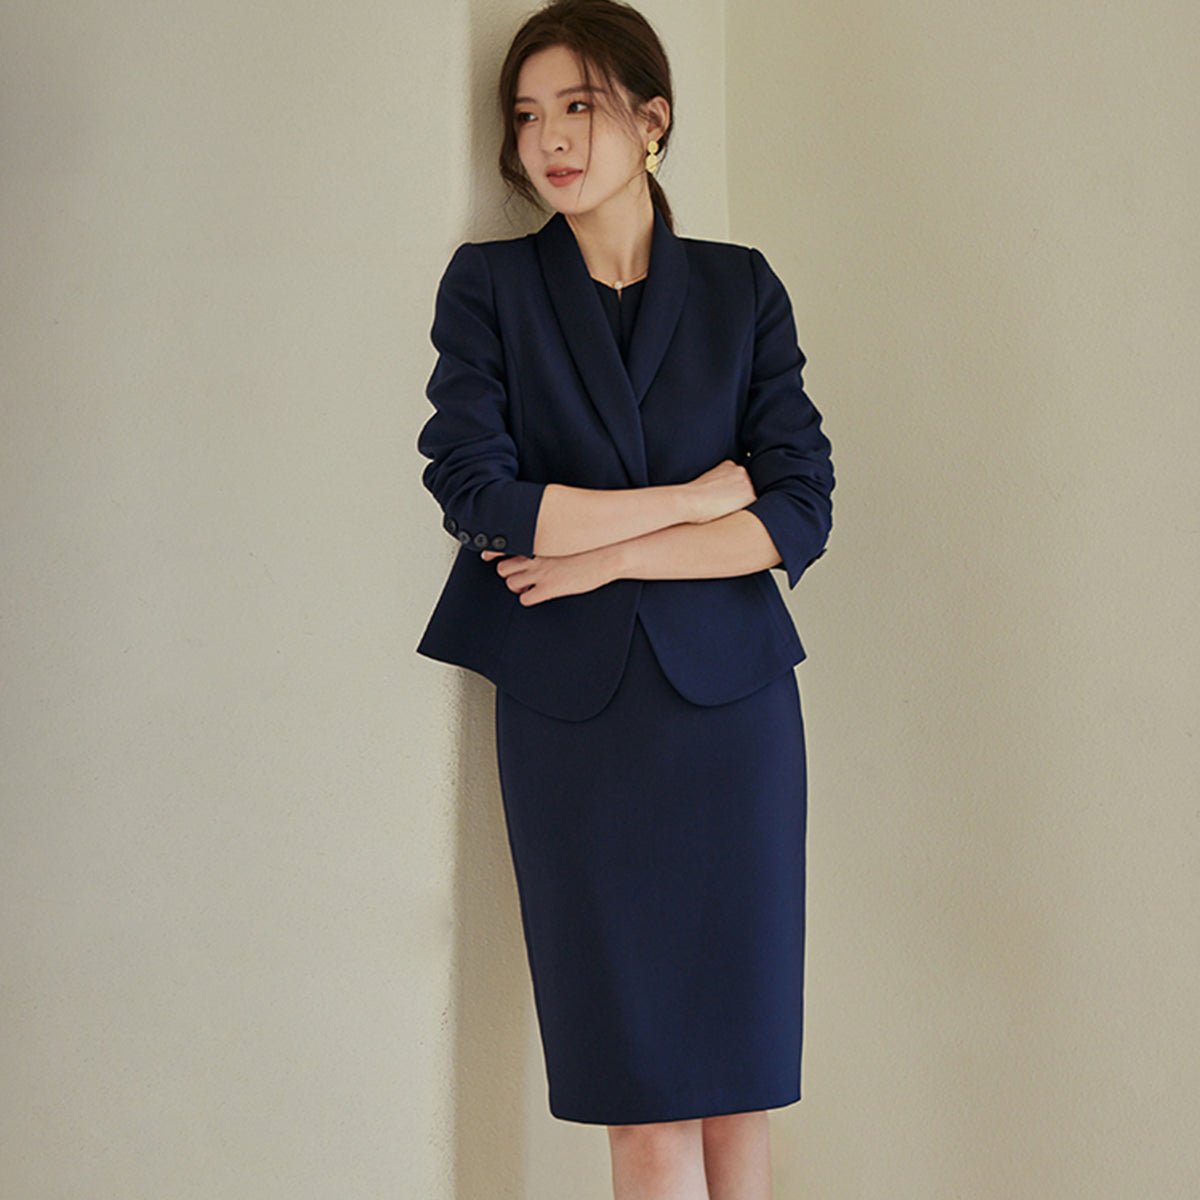 Navy Double-Breasted Blazer and Pencil Skirt Set